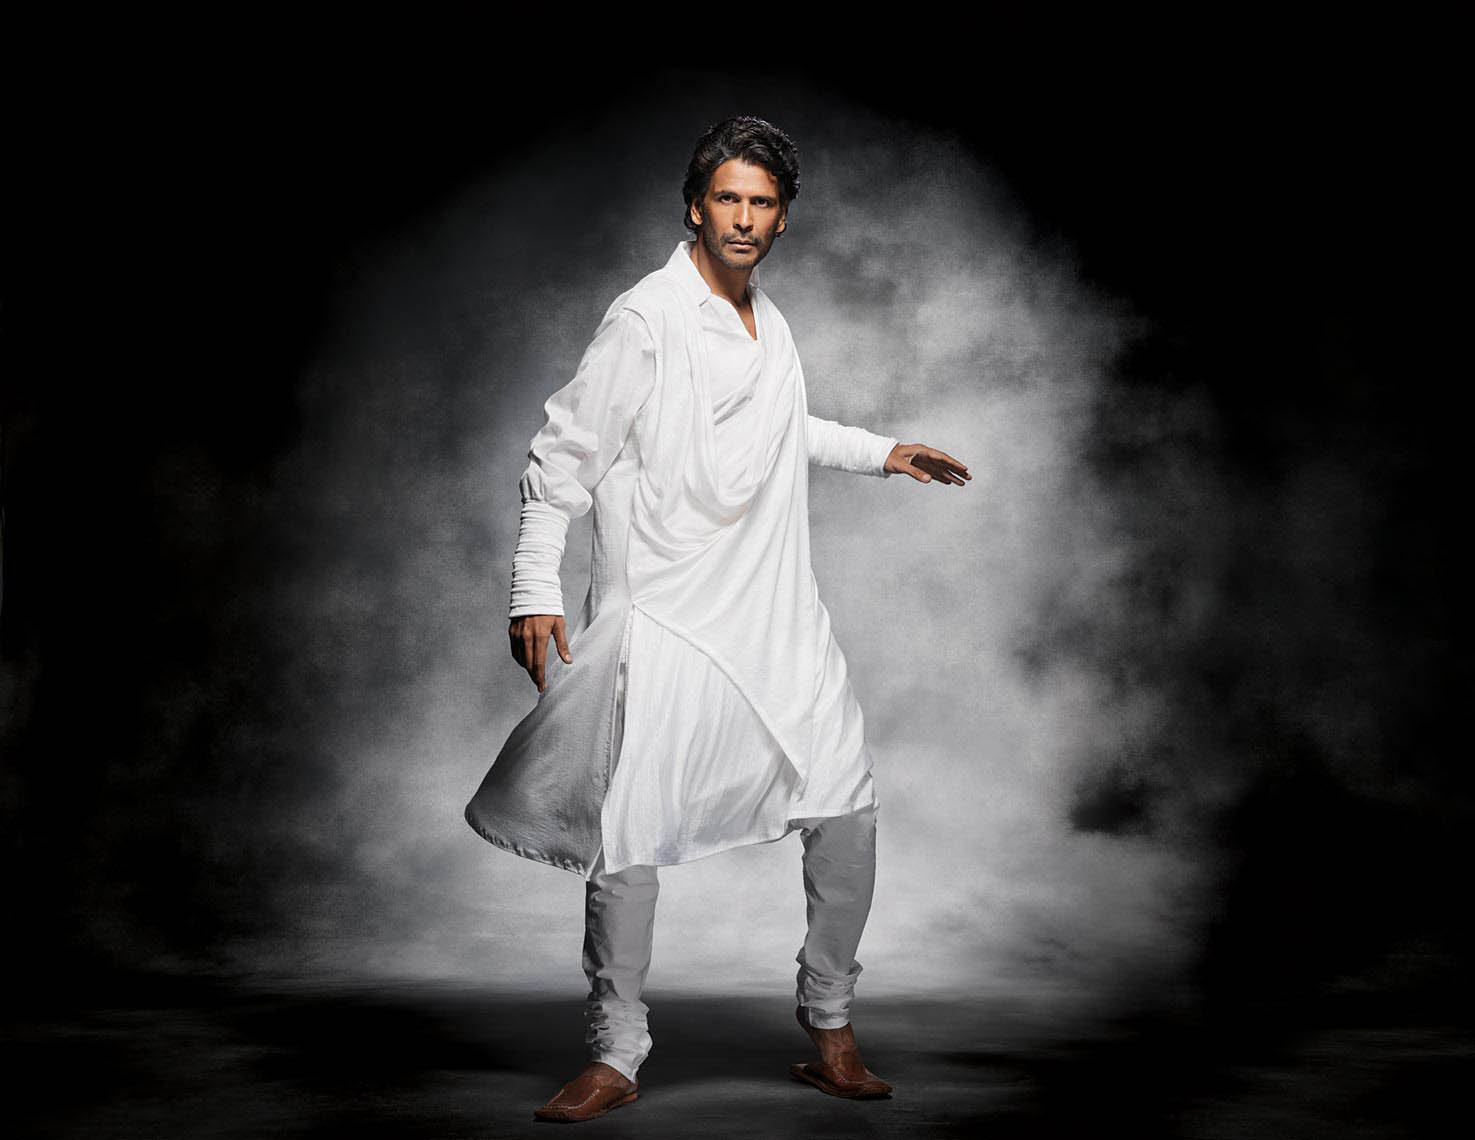 Best Bollywood Photographer in India Vikram Bawa, Shooting with star, Product Shoot, Jai Hind Collection, Shooting with Milind Soman, Best Fashion Photographer, Commercial Photographer, Advertising, Best Fashion Photographer Vikram Bawa in Mumbai, India